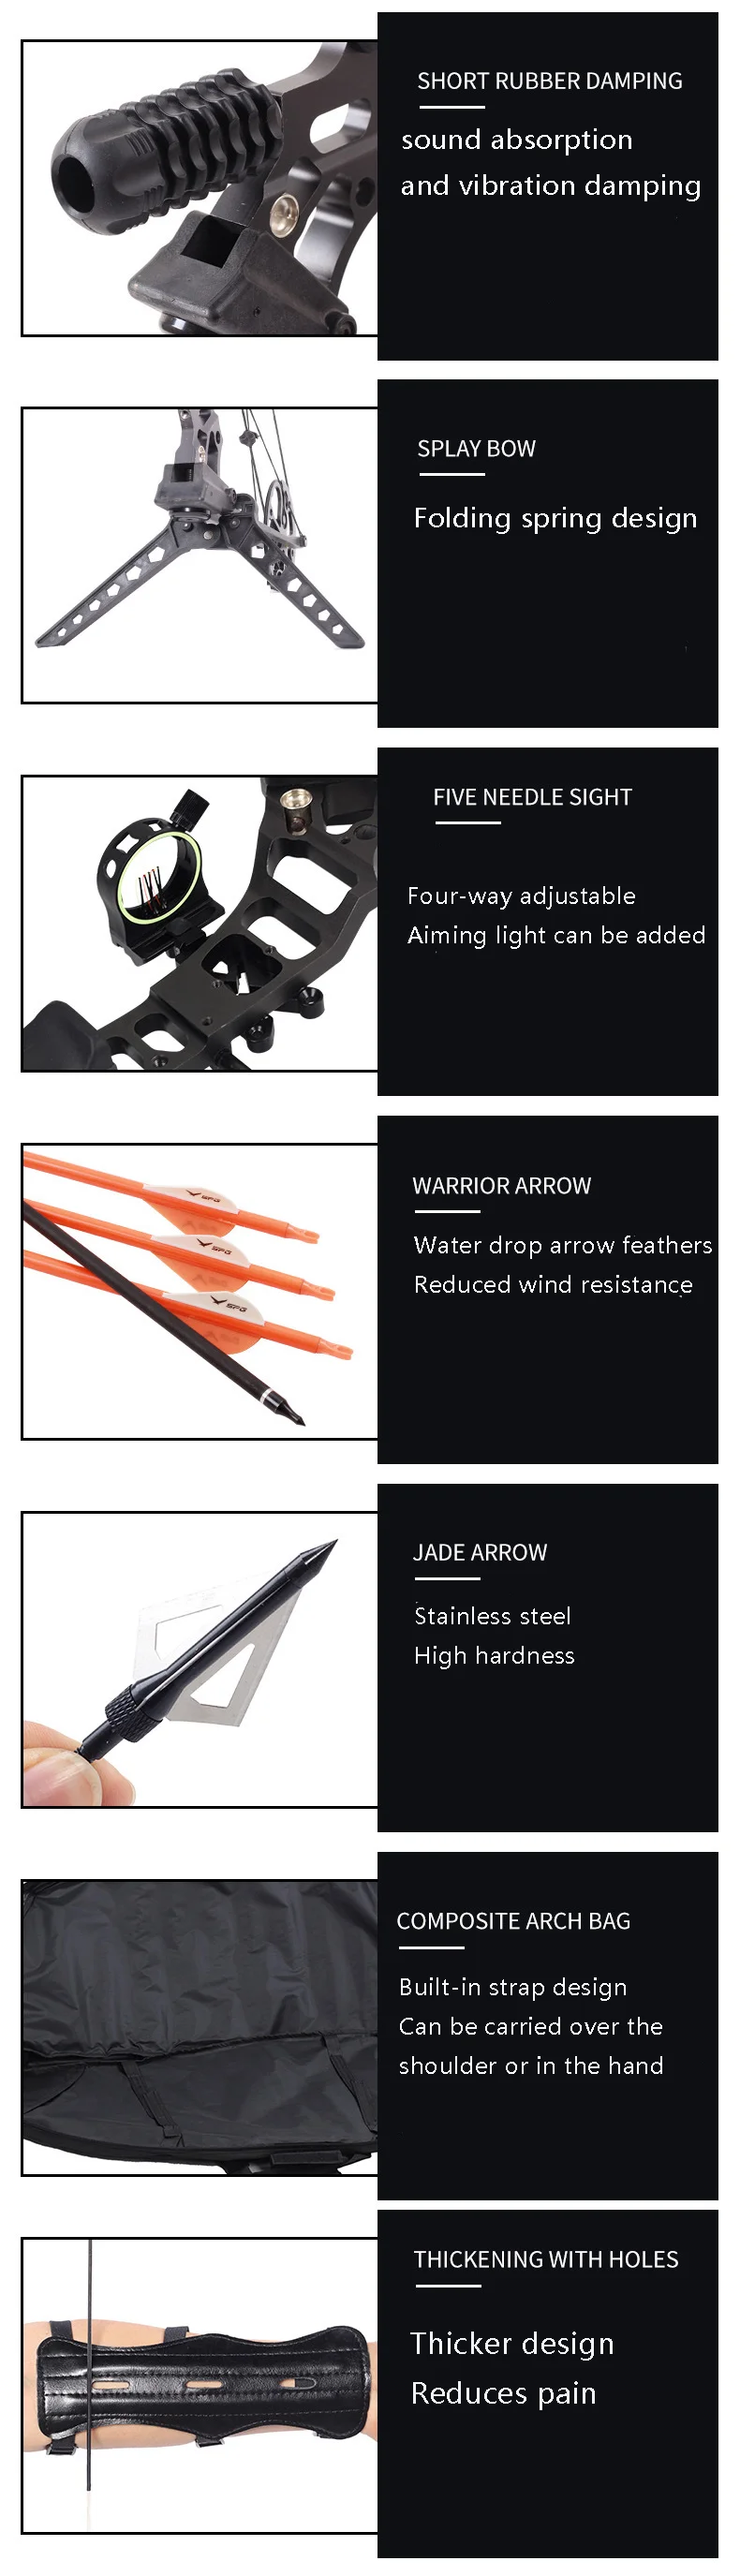 ACCMOS Compound Bow Archery Bow And Arrow 32pc Set